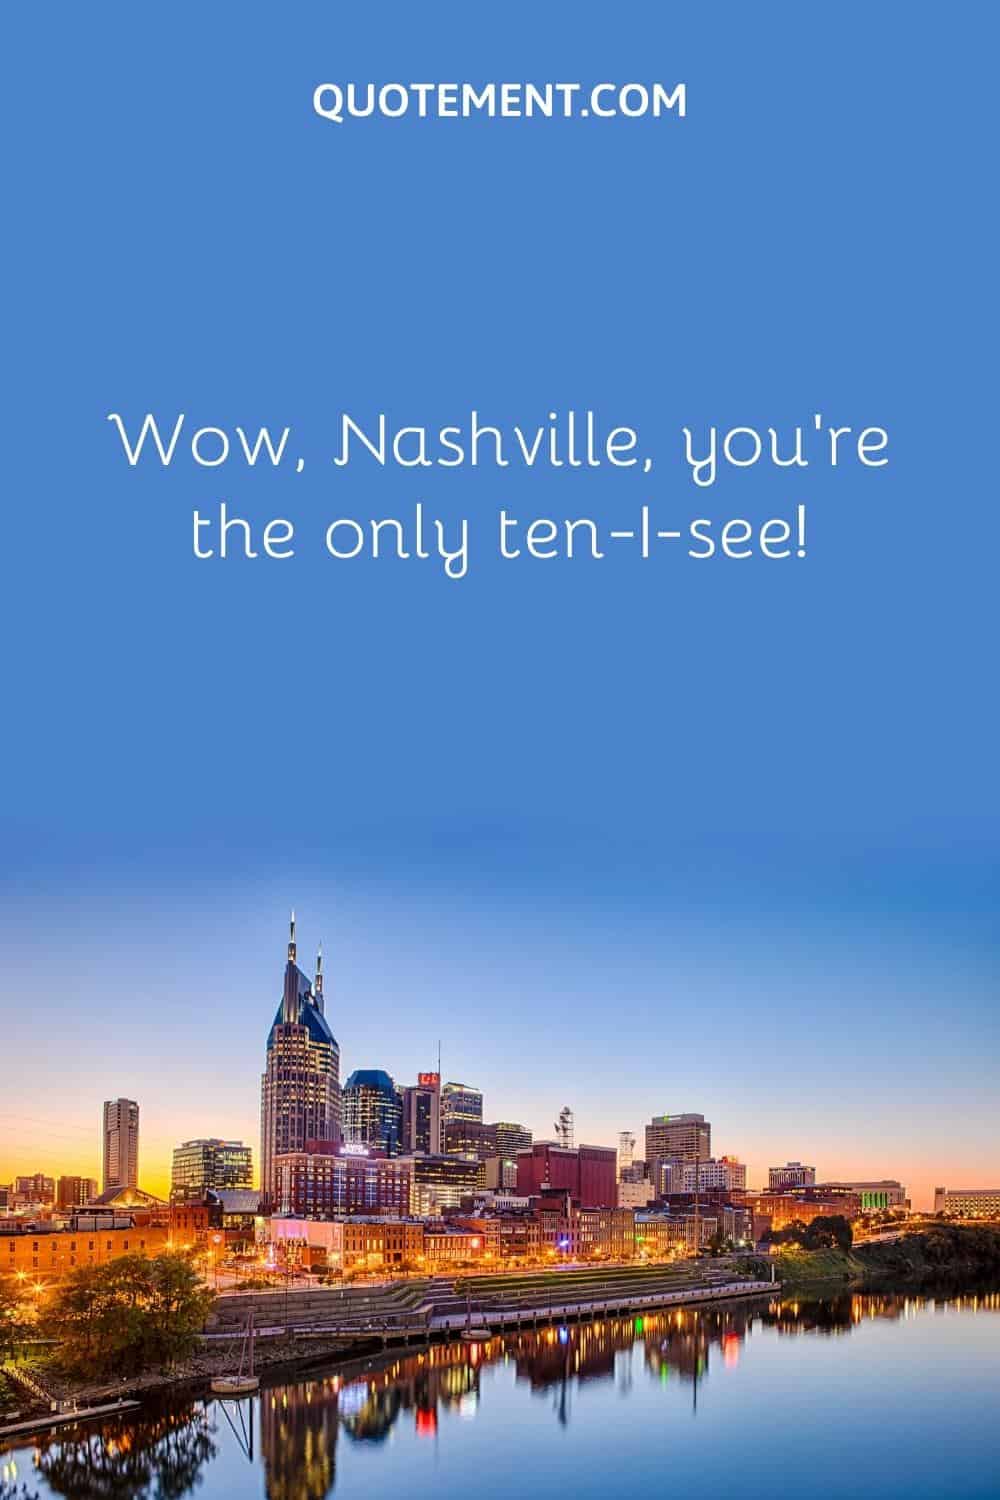 Wow, Nashville, you’re the only ten-I-see!